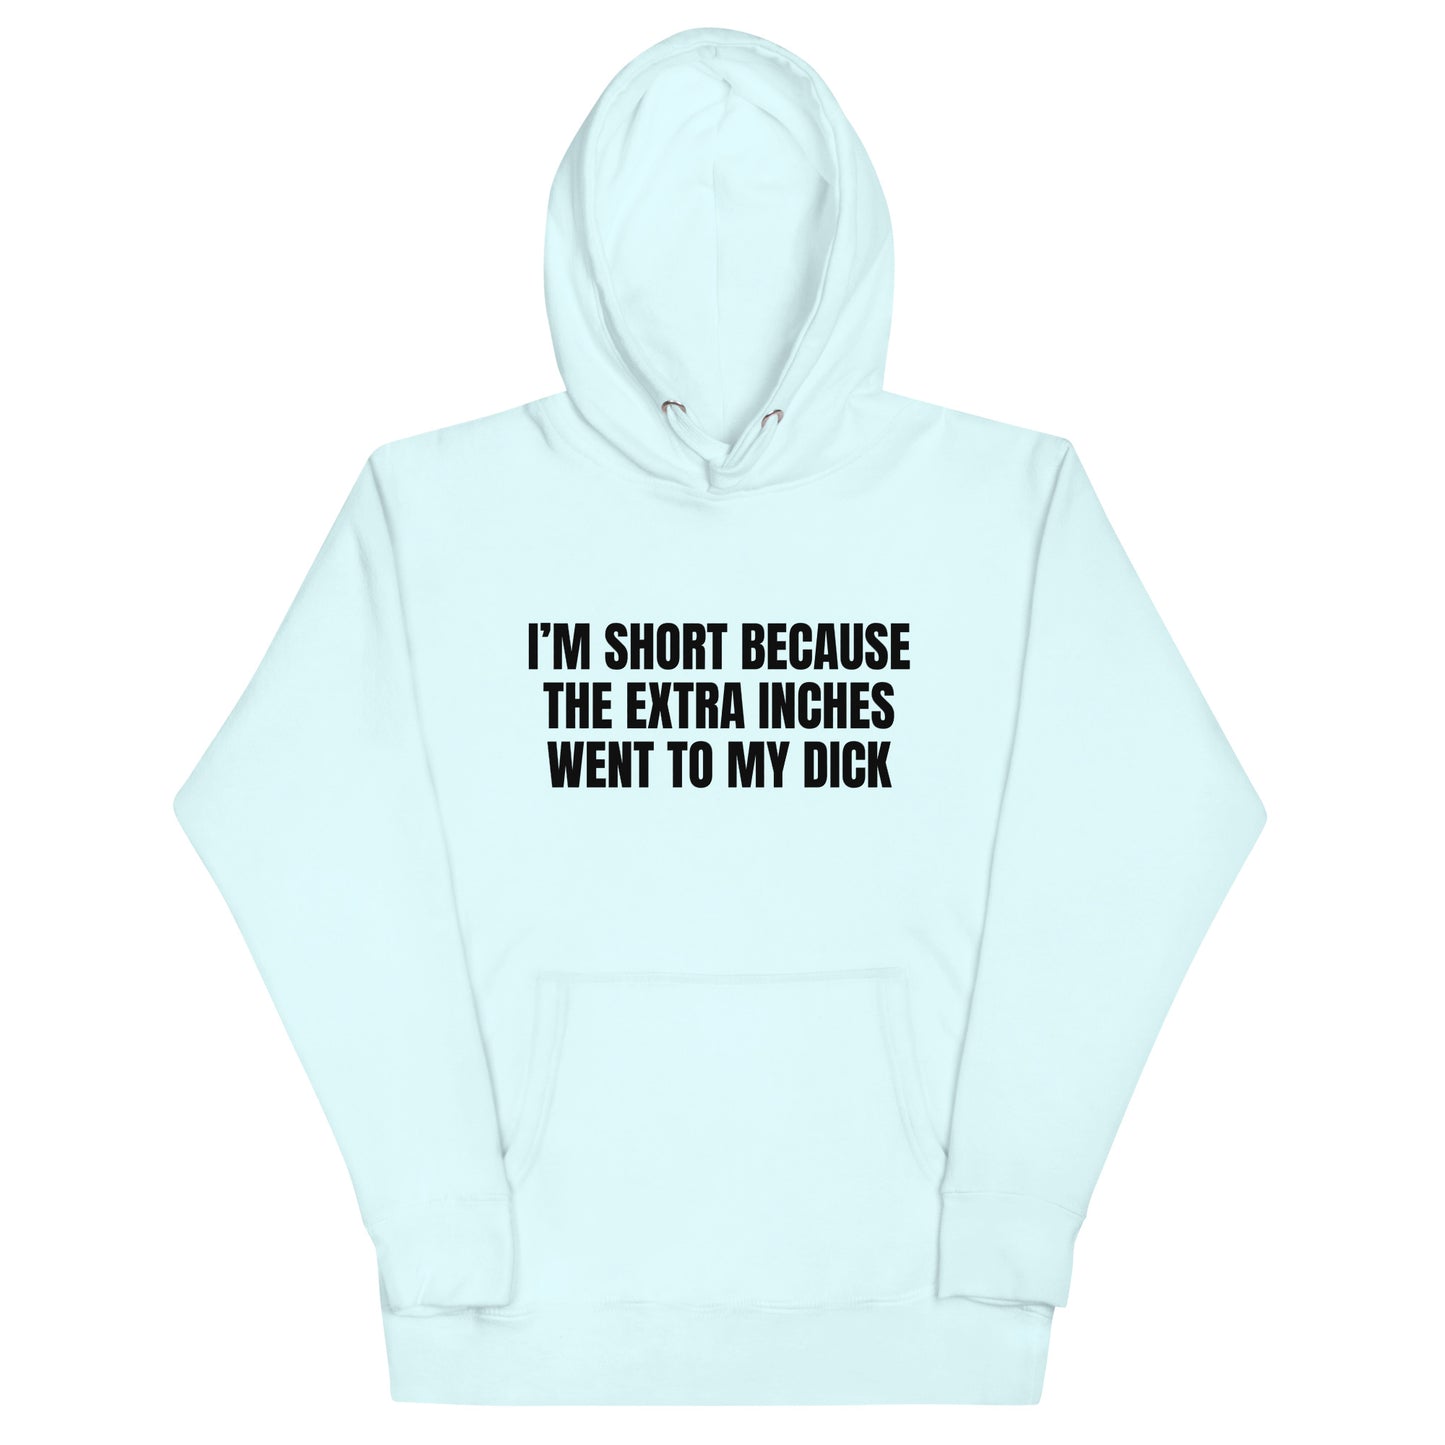 I'm Short Because the Extra Inches Went to My Dick Unisex Hoodie